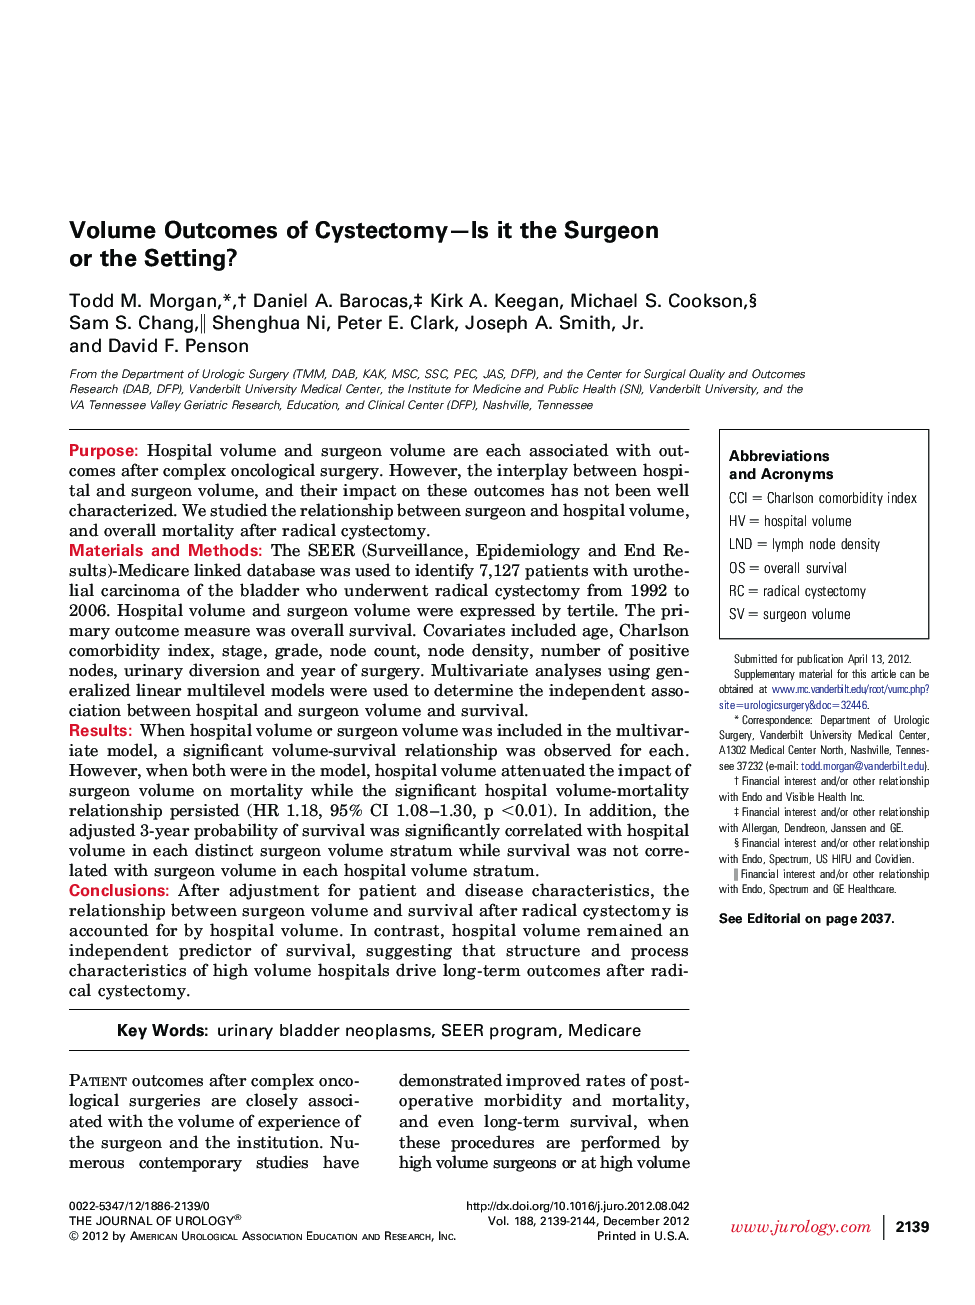 Volume Outcomes of Cystectomy-Is it the Surgeon or the Setting?